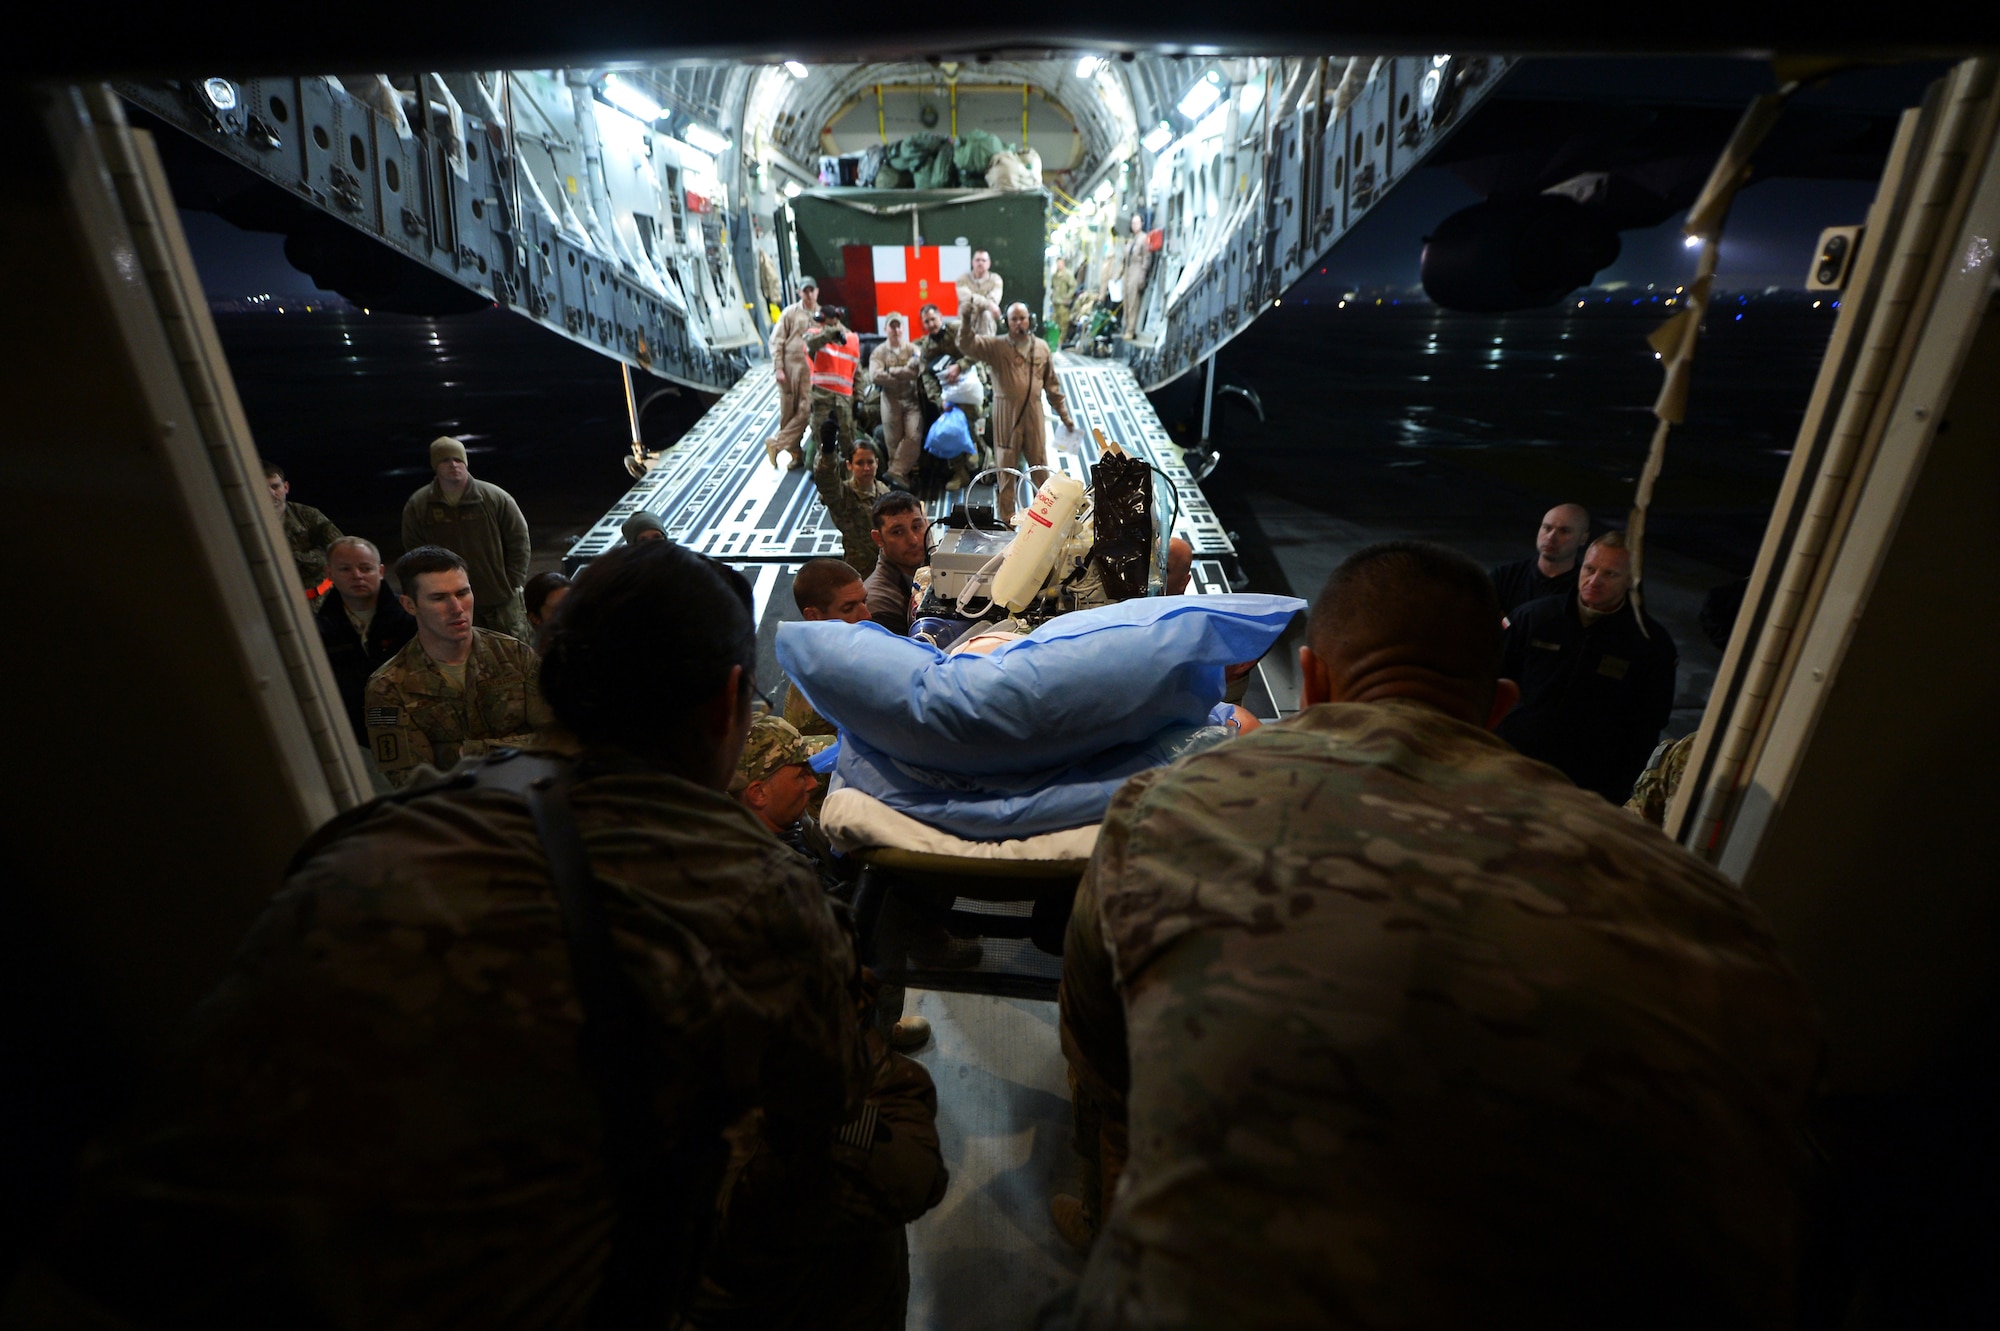 Members of the Contingency Aeromedical Staging Facility and 455th Expeditionary Aeromedical Evacuation Squadron Critical Care Air Transport Team assist patients onto C-17 Globemaster III at Bagram Airfield, Afghanistan, March 21, 2013. The CASF is the relay between the Craig Joint Theater Hospital and aeromedical evacuation missions throughout Afghanistan. (U.S. Air Force photo/Senior Airman Chris Willis)